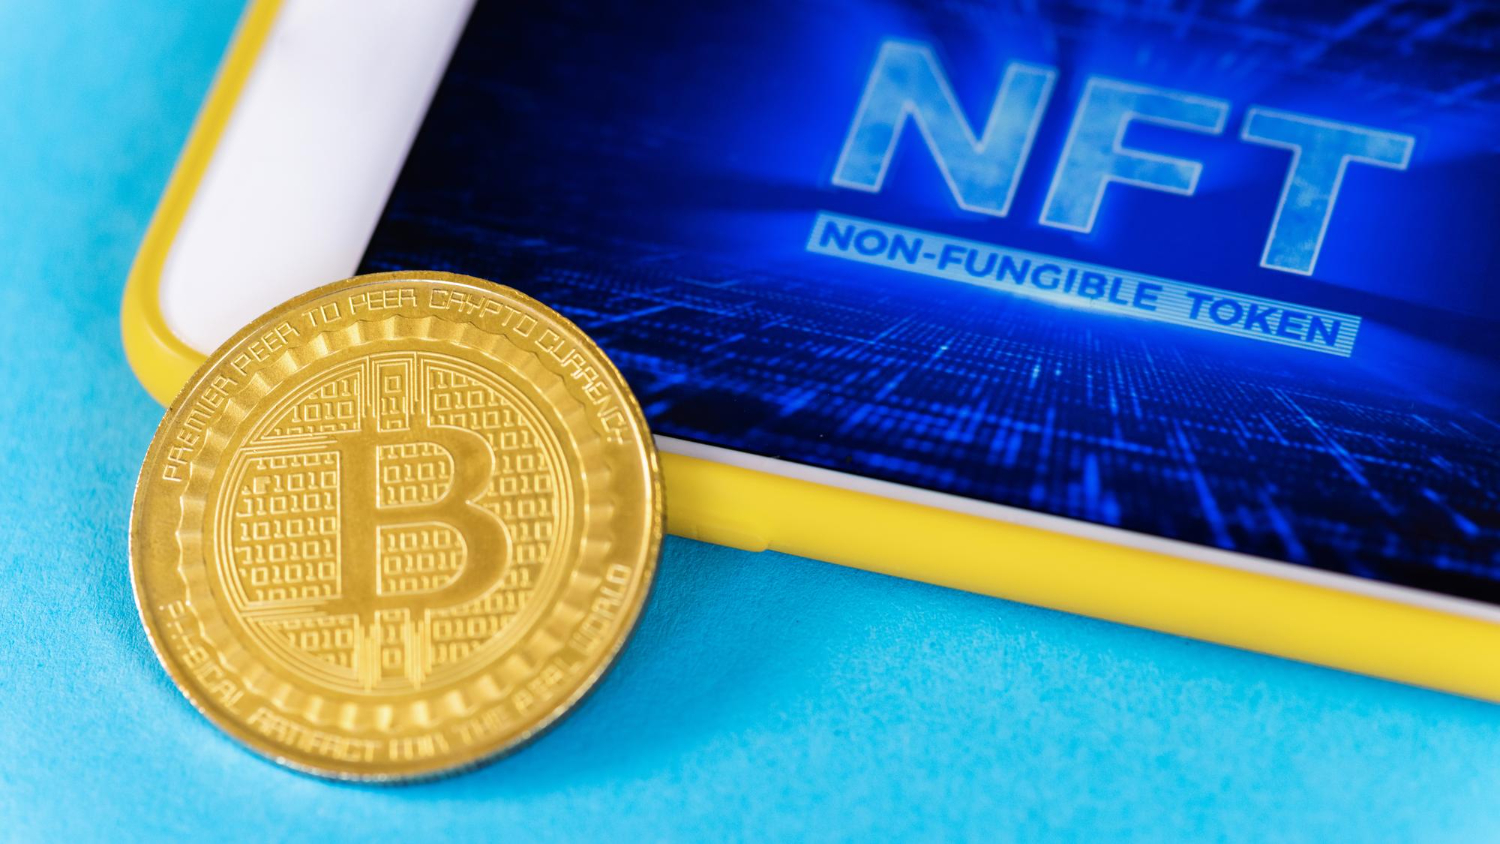 NFT is connecting the real world to the virtual currency world